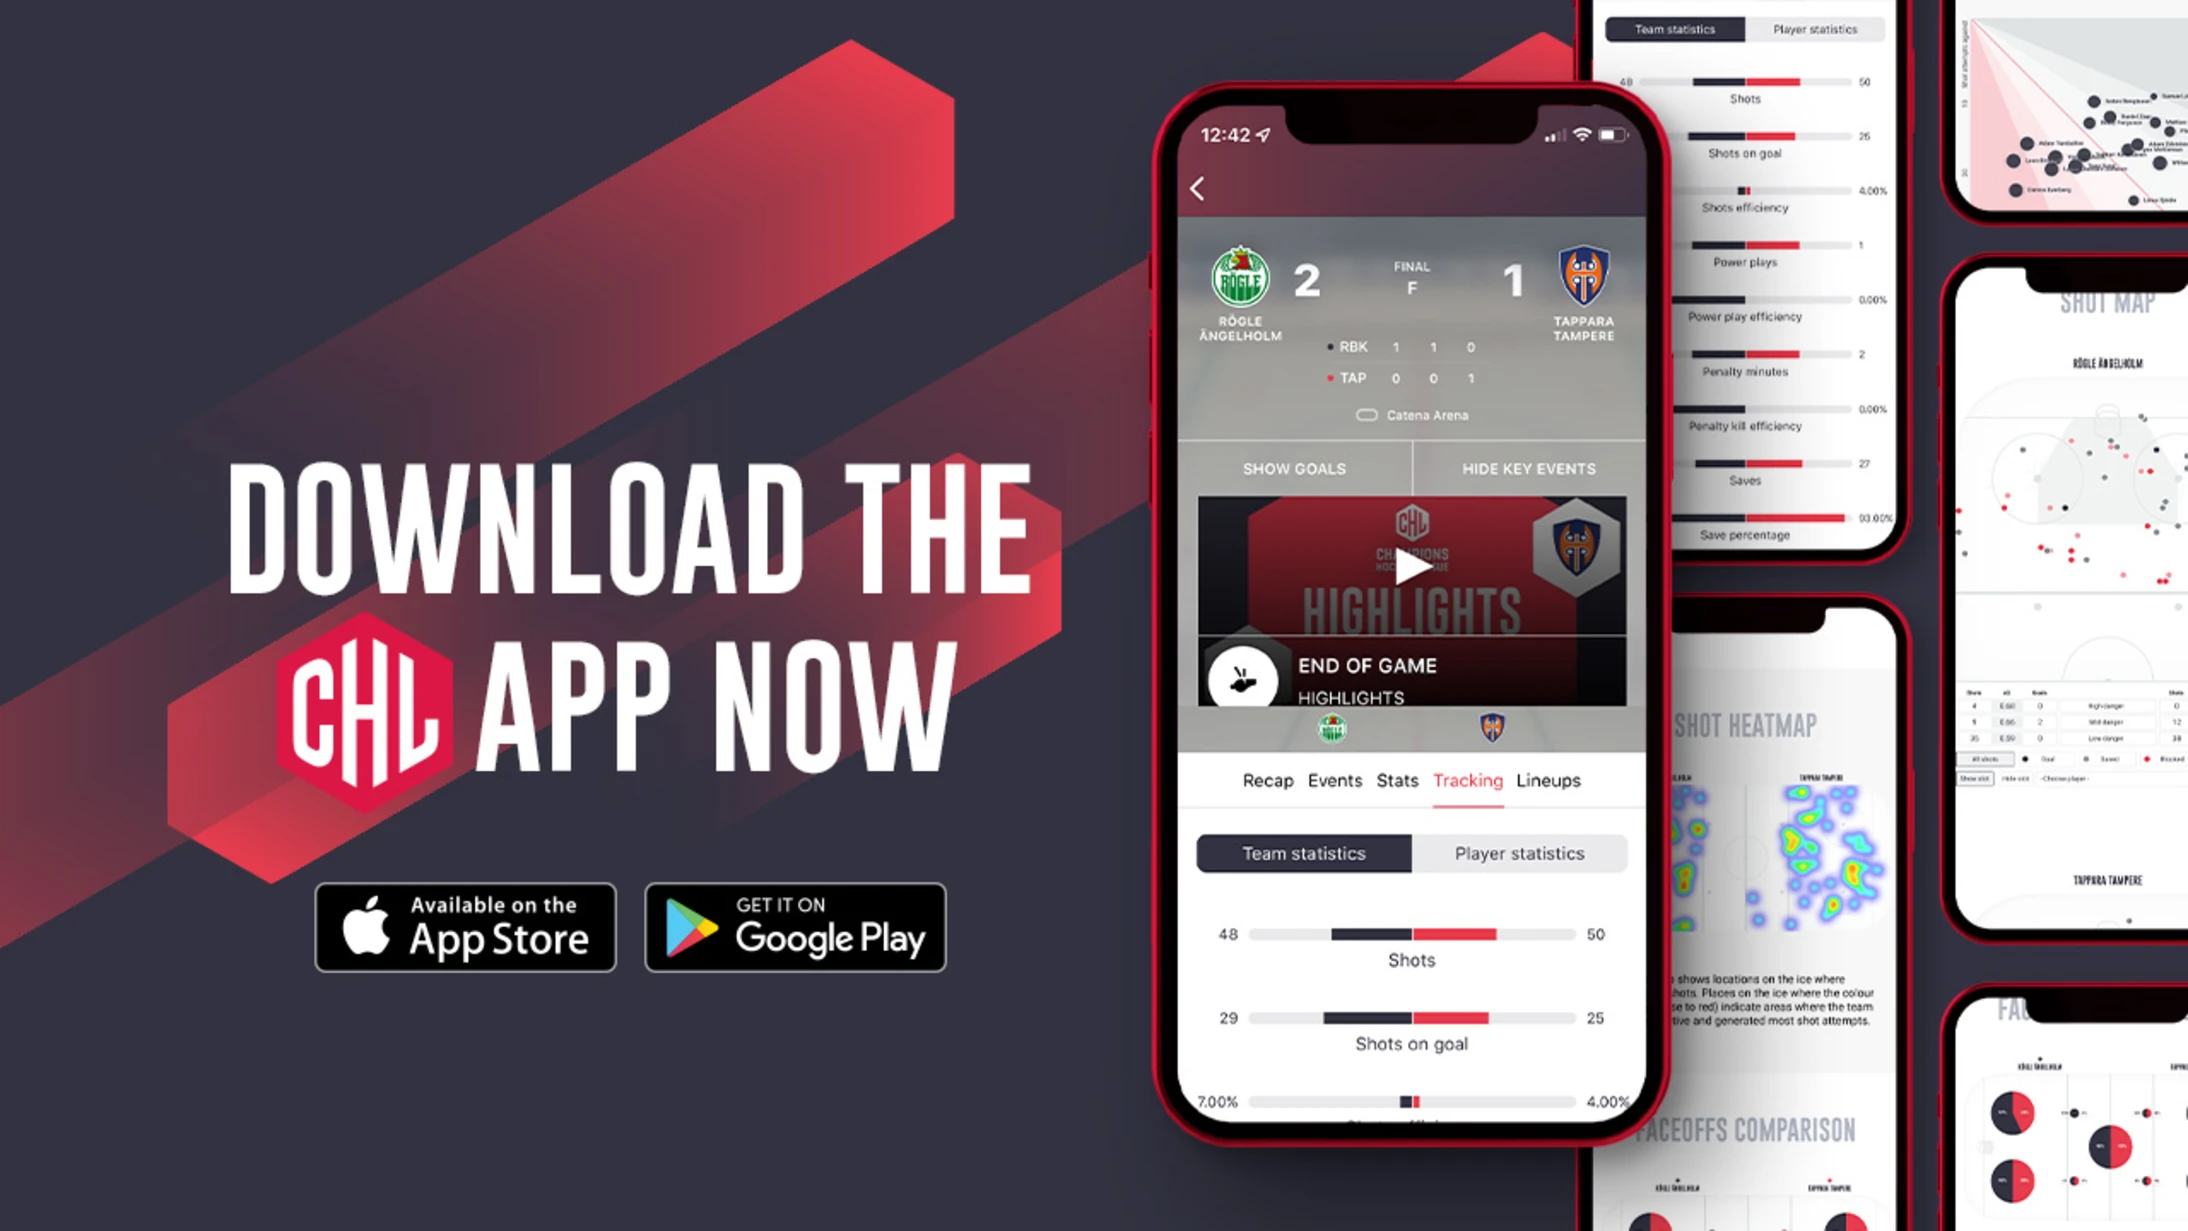 Download the official CHL App now